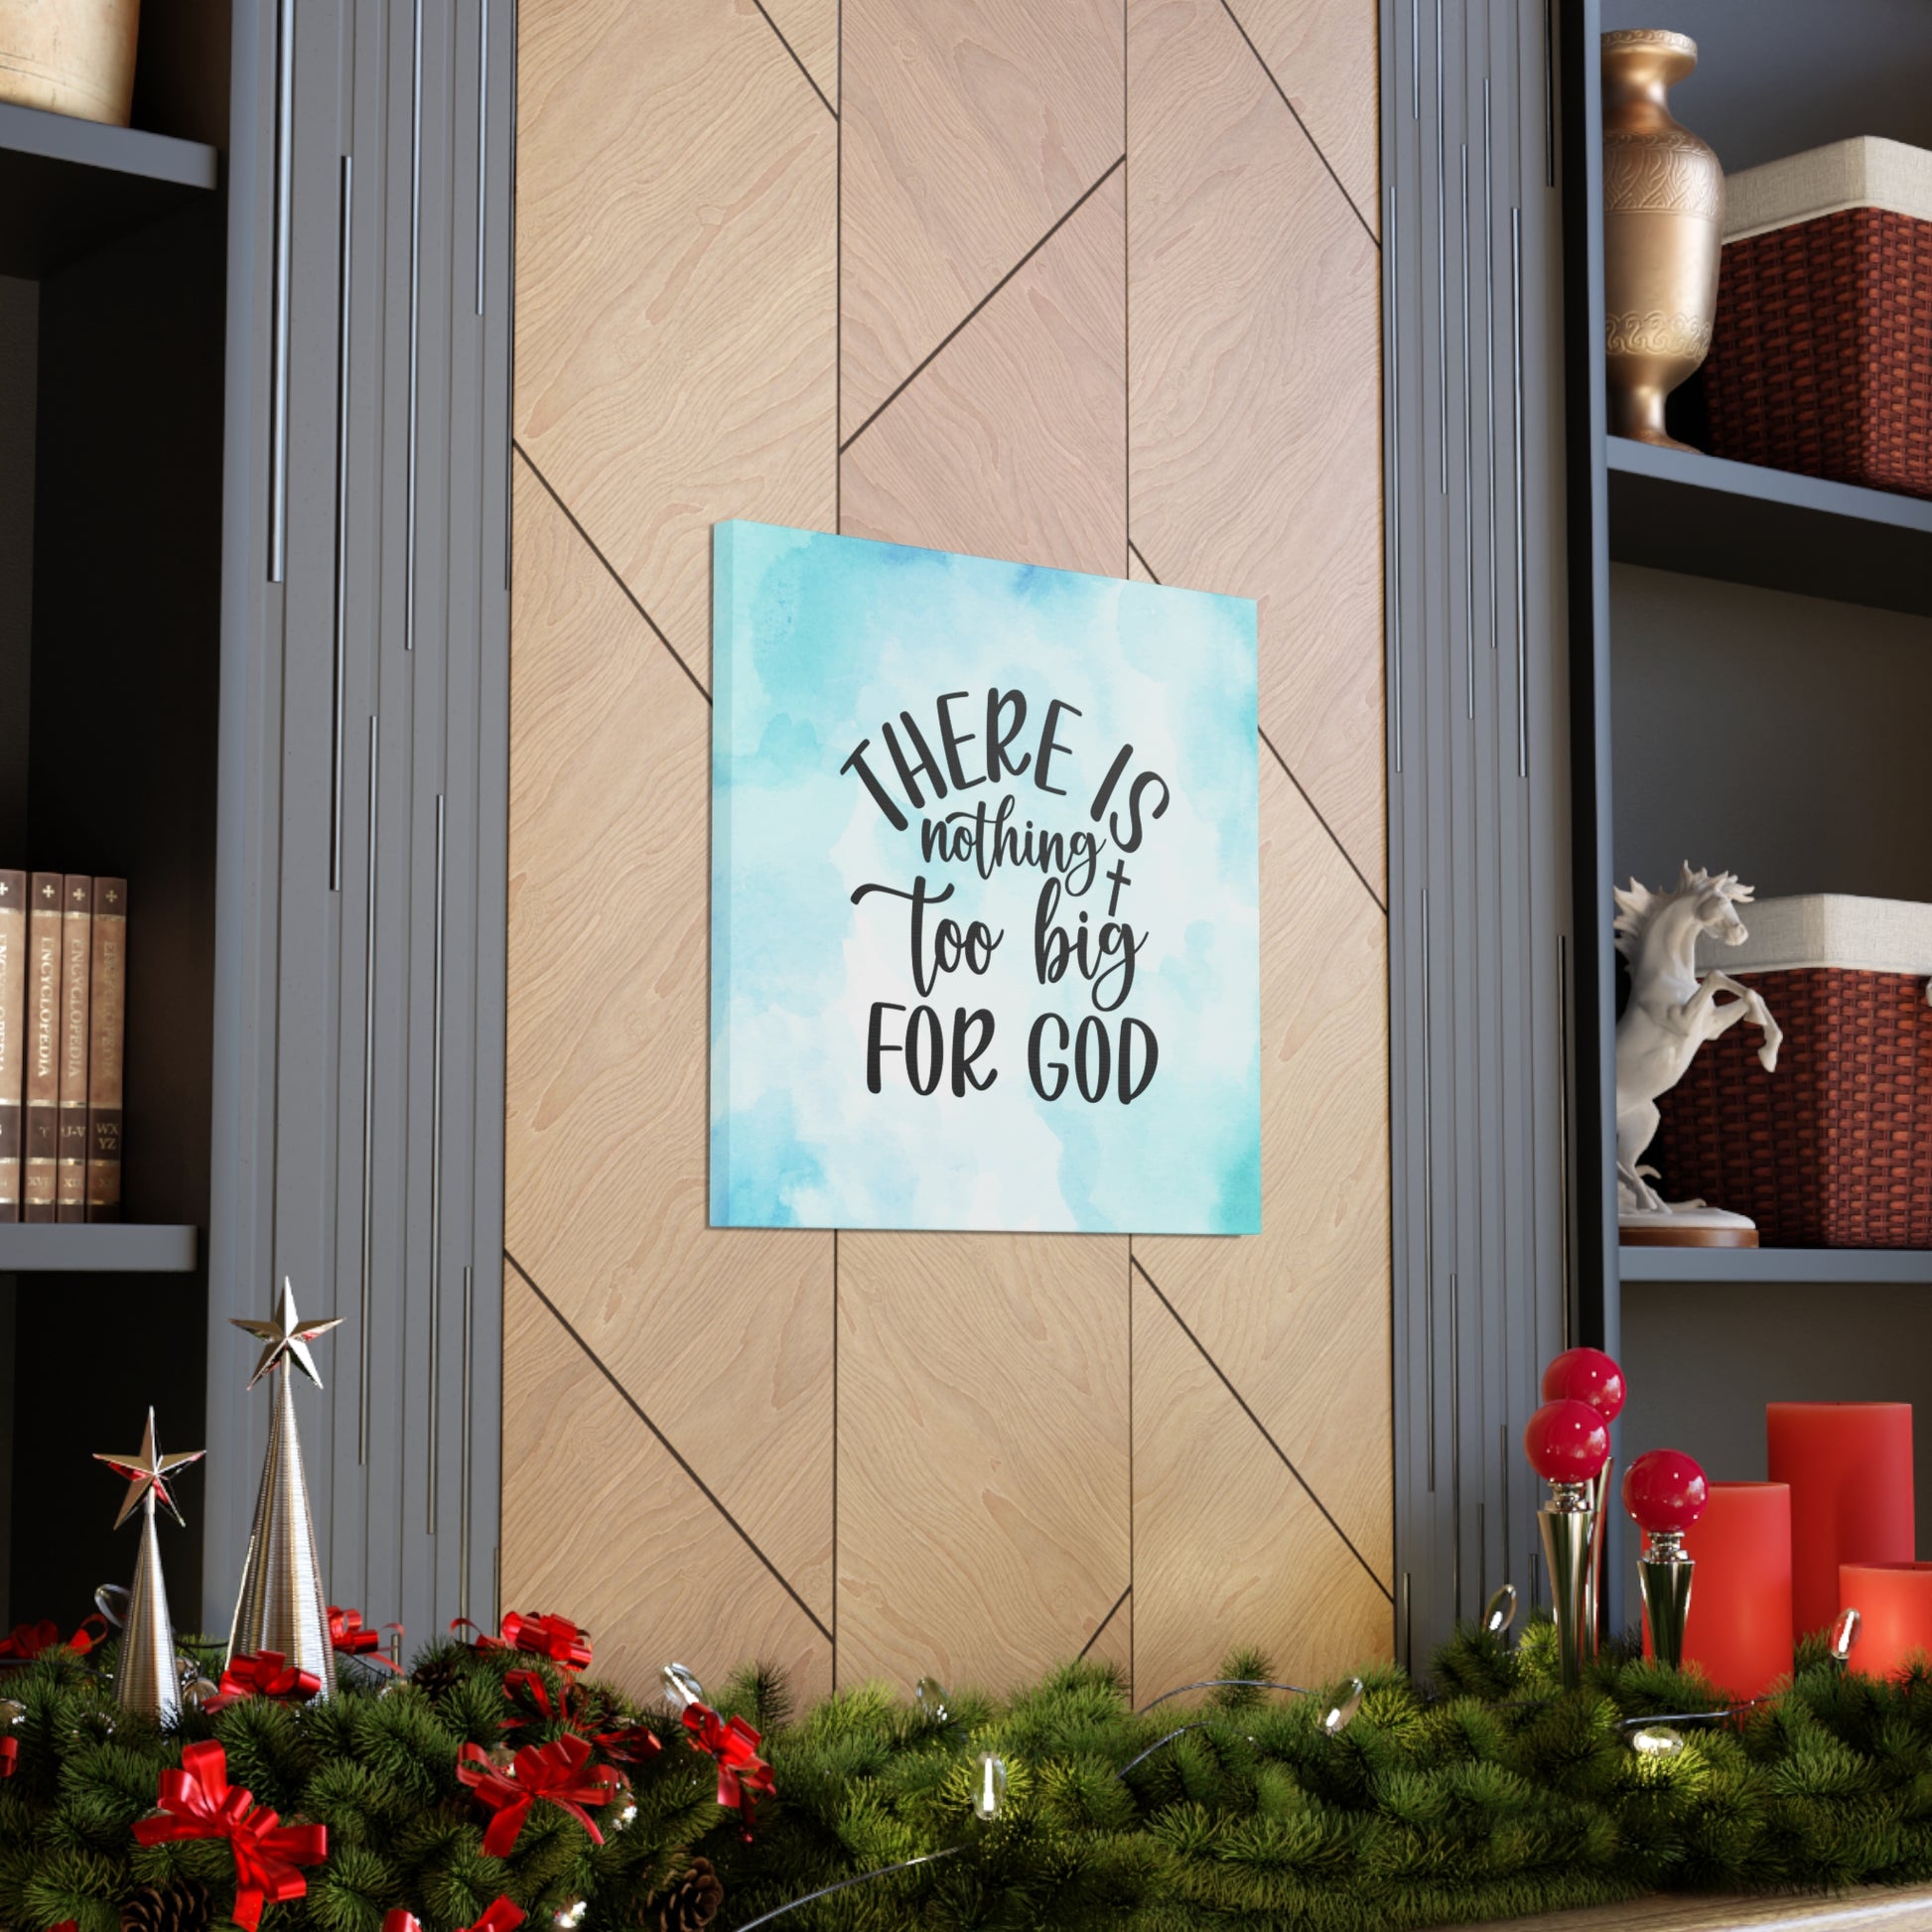 "There Is Nothing Too Big For God" Wall Art - Weave Got Gifts - Unique Gifts You Won’t Find Anywhere Else!